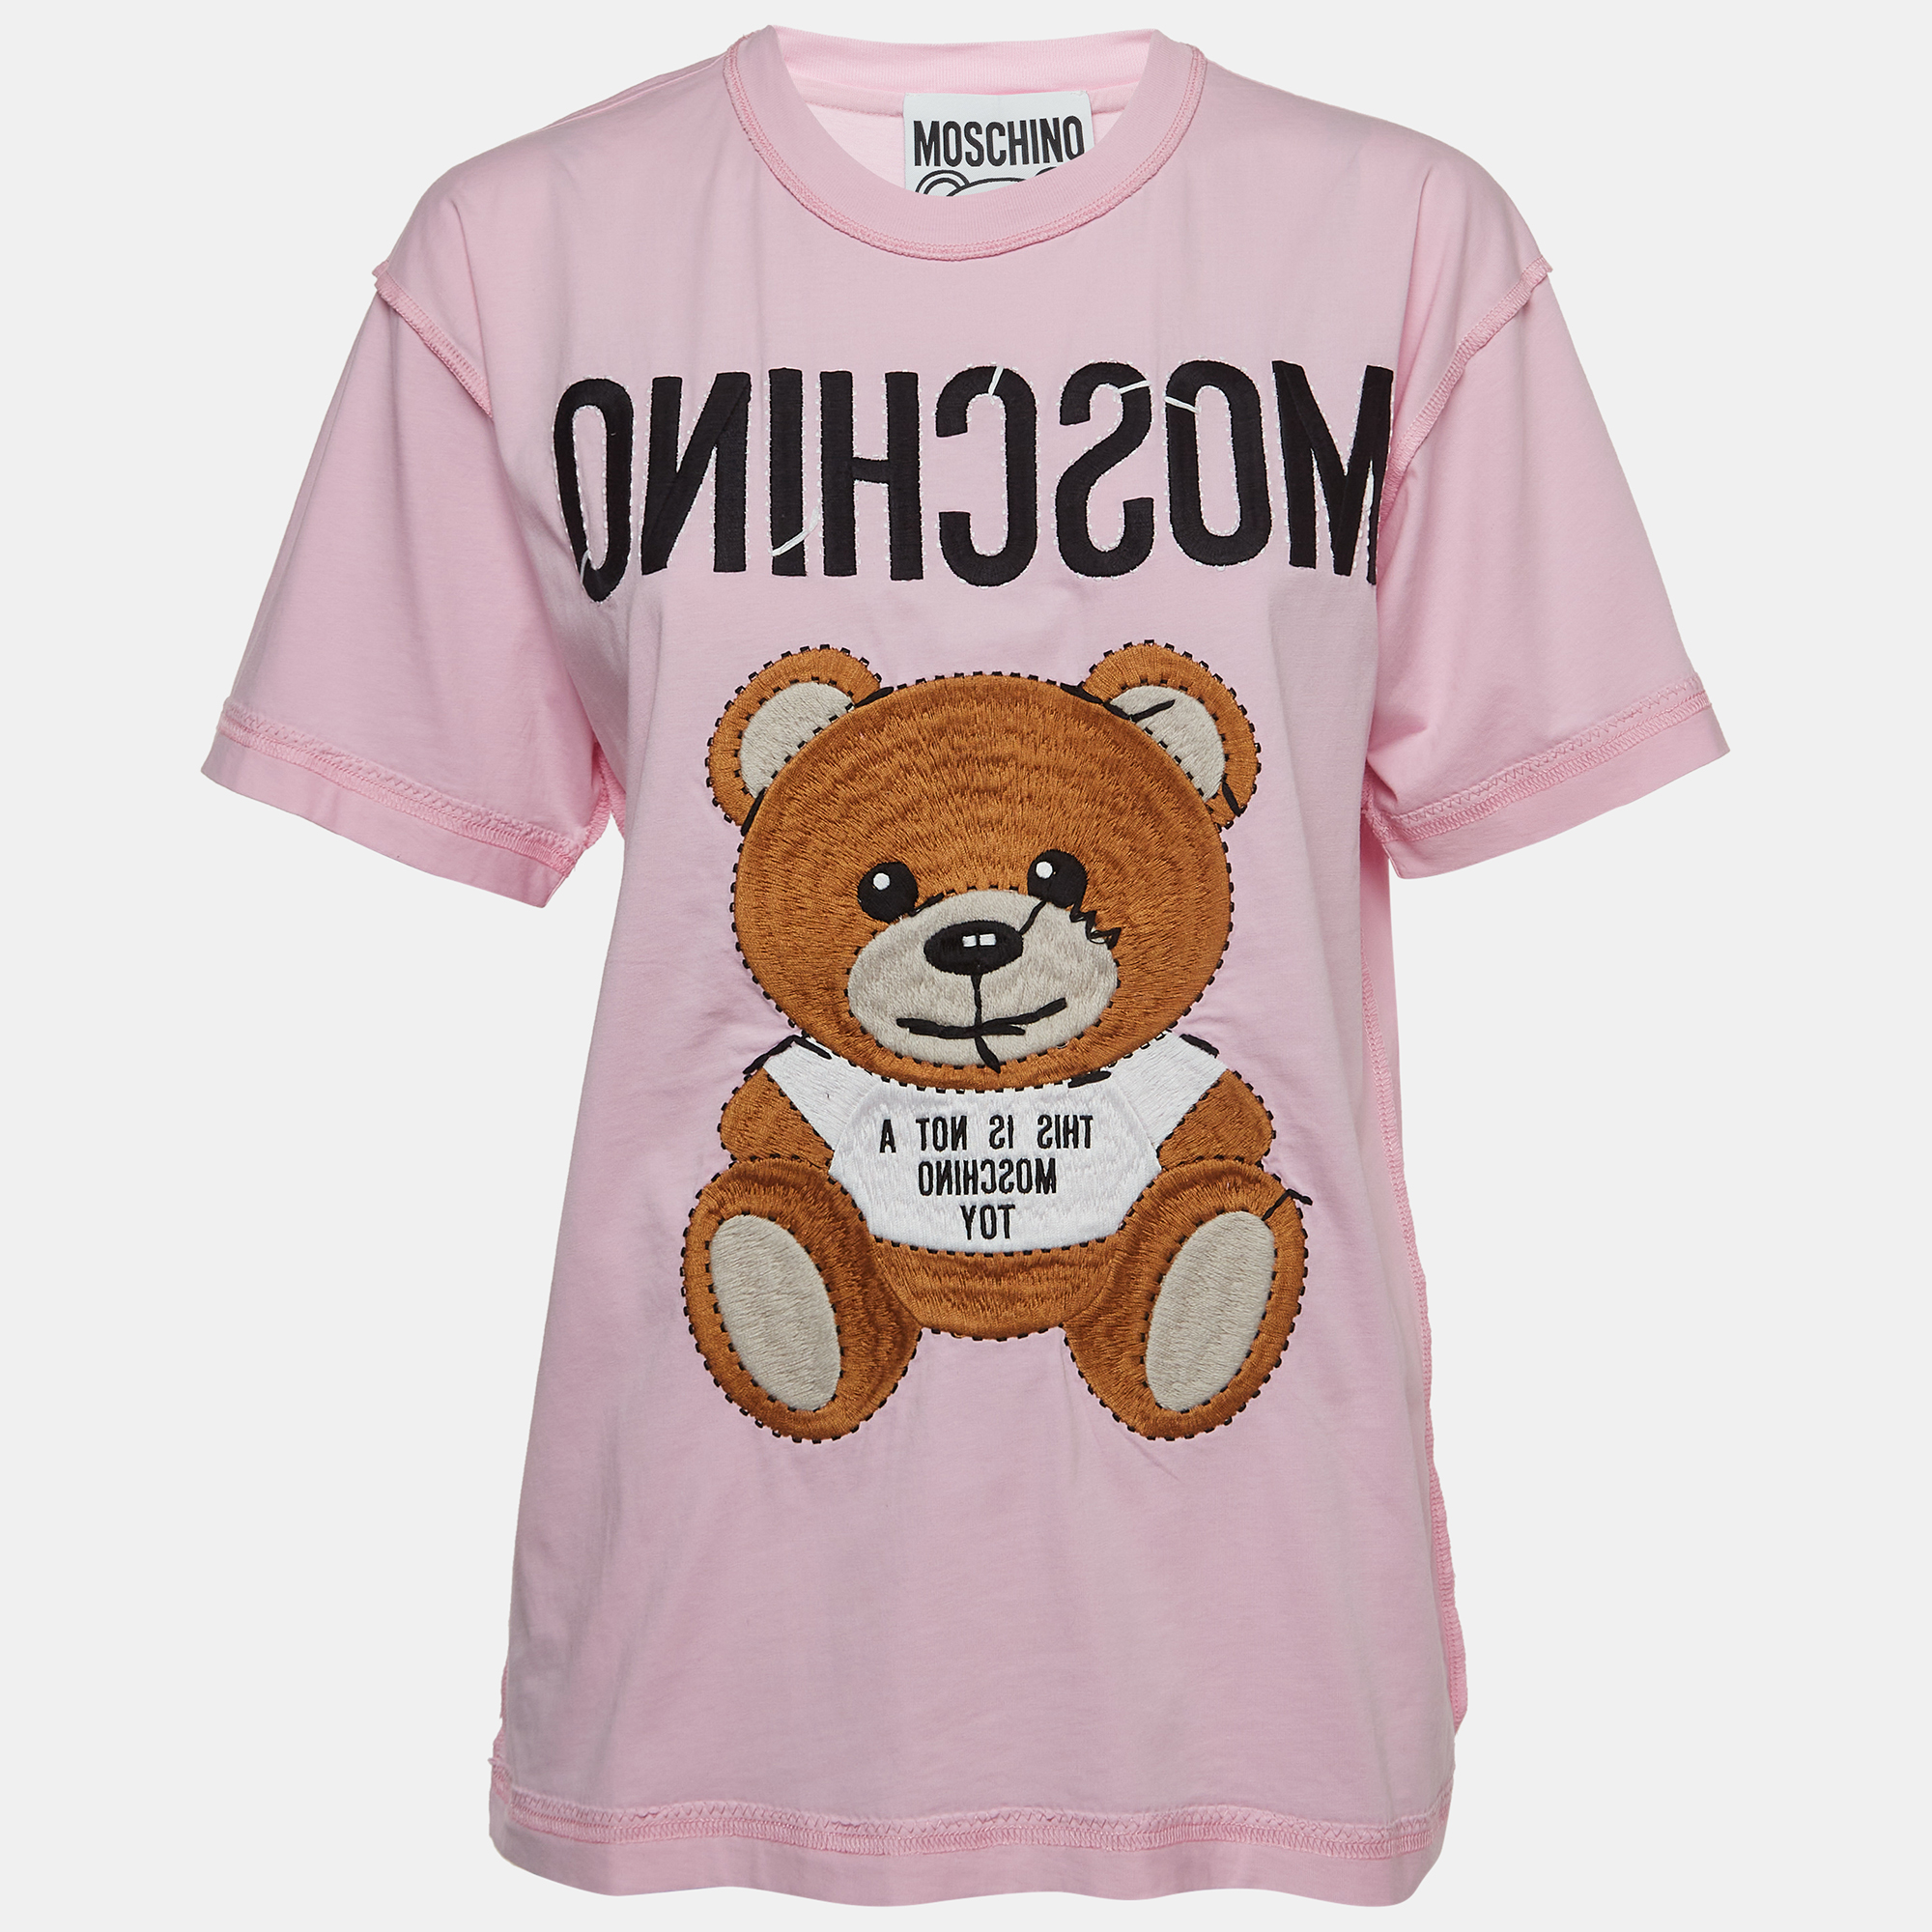 Pre-owned Moschino Couture Pink Embroidered Teddy Bear Cotton T-shirt Xxs